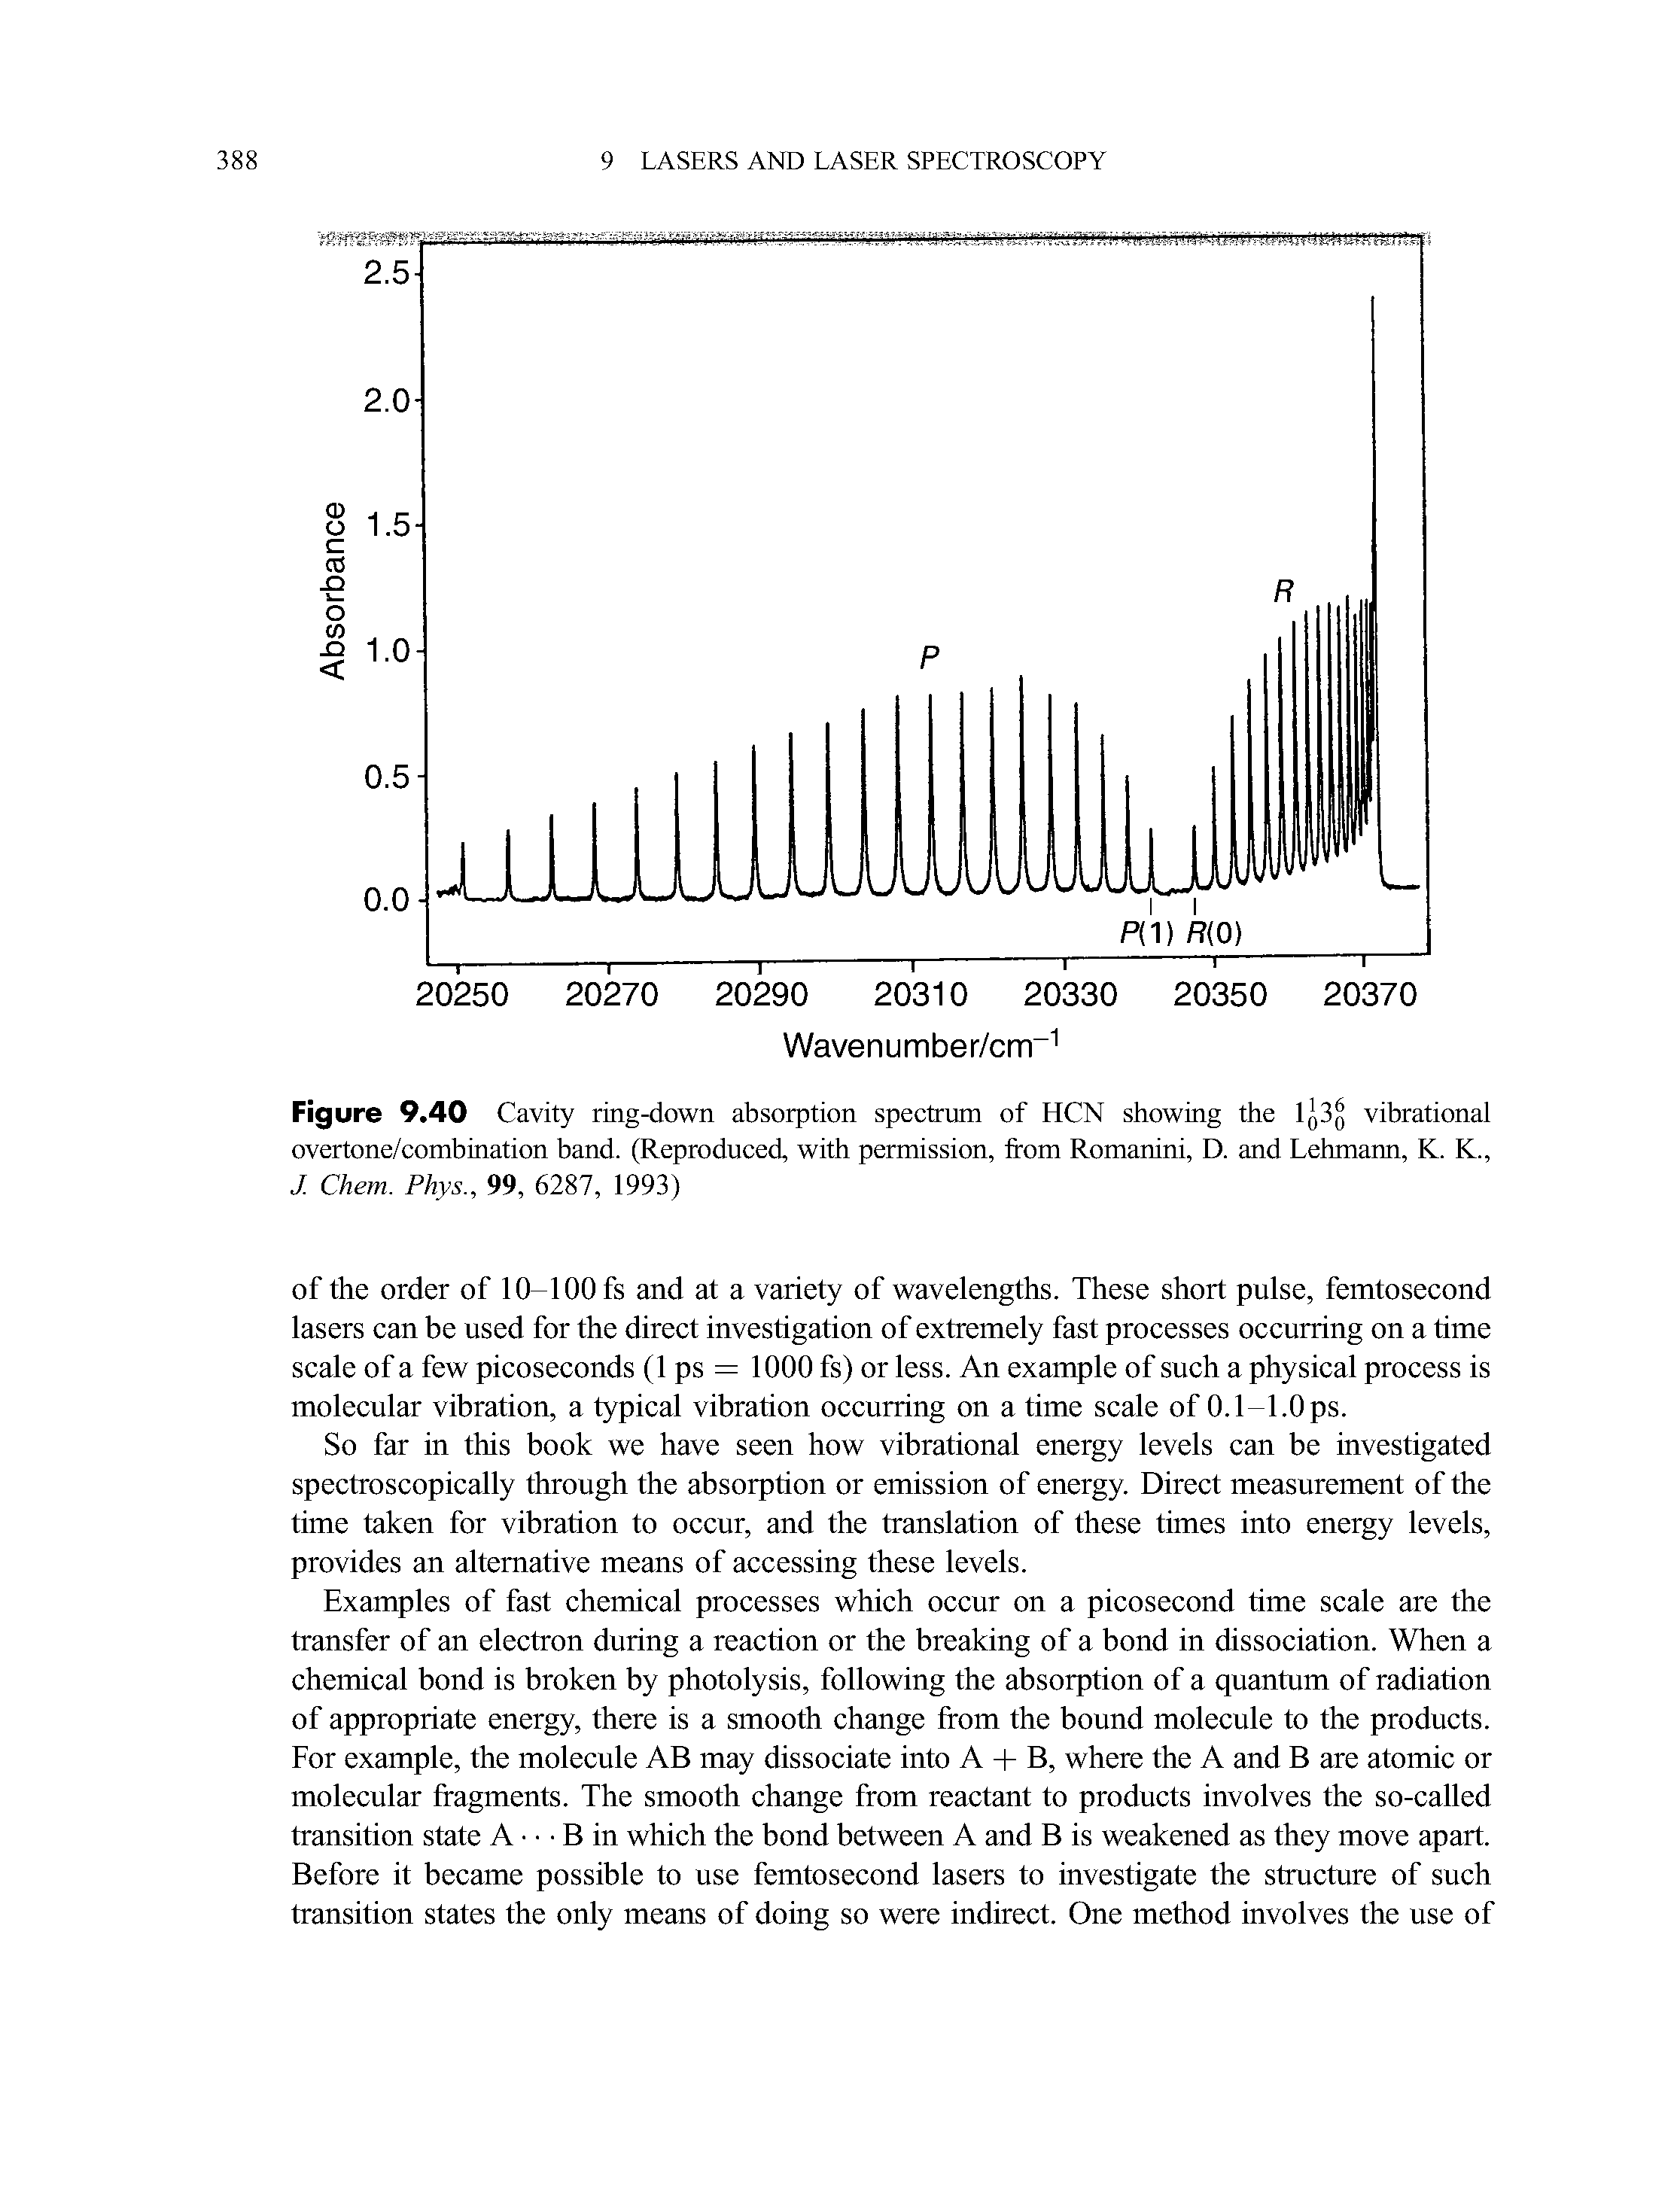 Figure 9.40 Cavity ring-down absorption spectrum of HCN showing the overtone/combination band. (Reproduced, with permission, from Romanini, D. and Lehmann, K. K., J. Chem. Phys., 99, 6H1, 1993)...